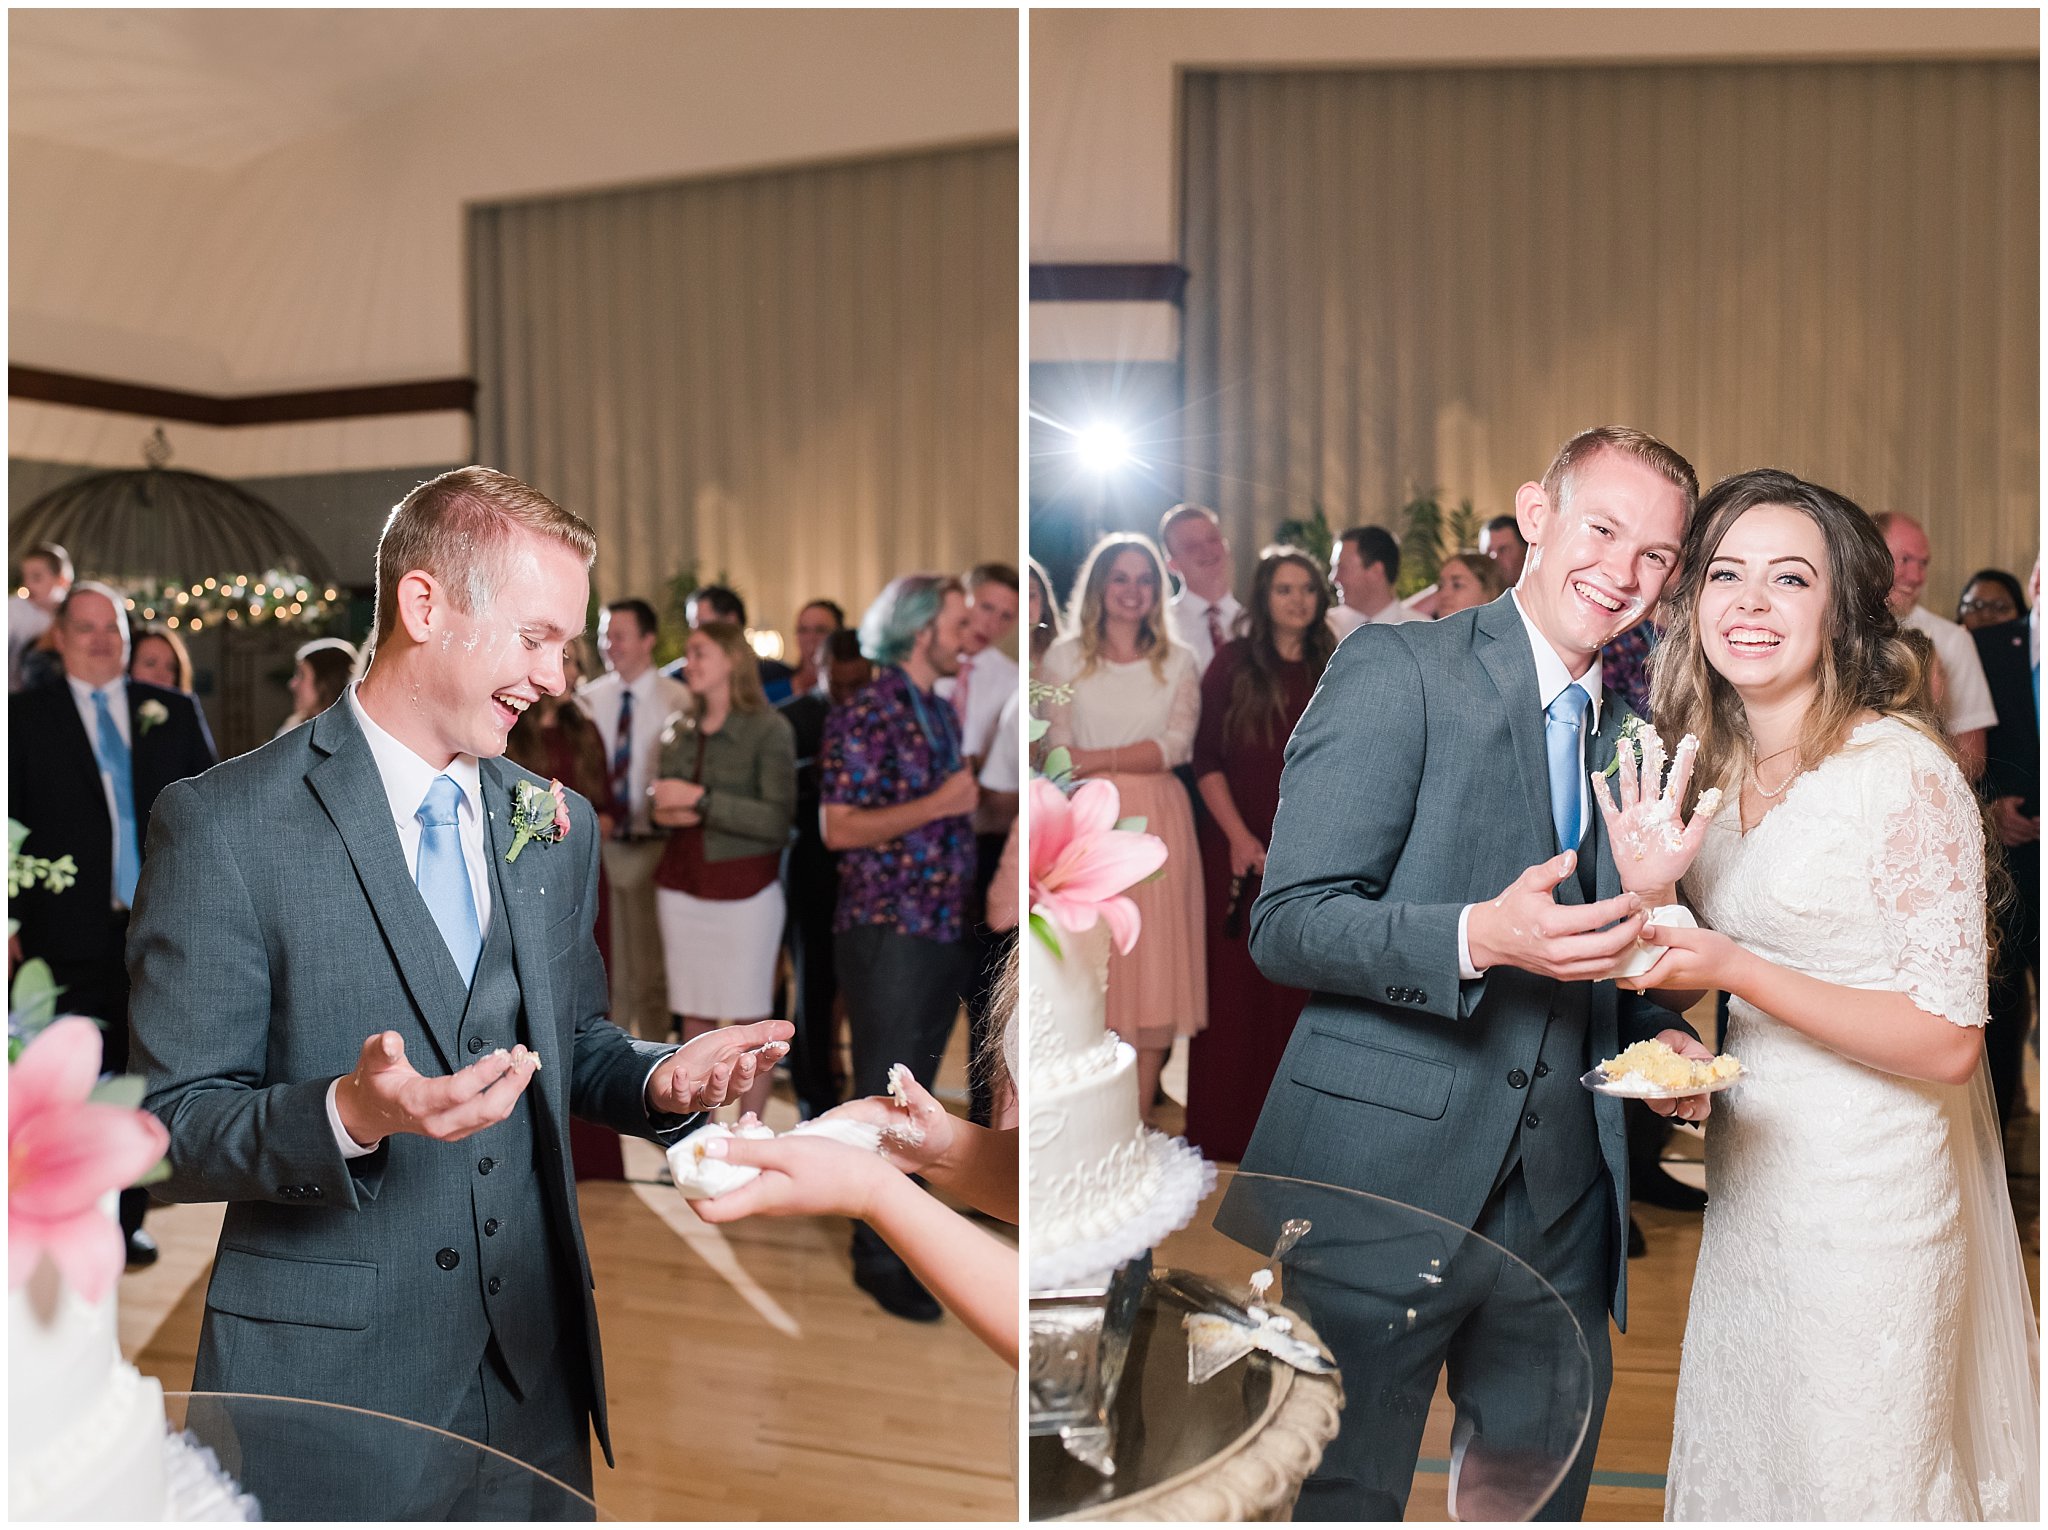 Tropical wedding cake and cake cutting during Utah reception | Jessie and Dallin Photography